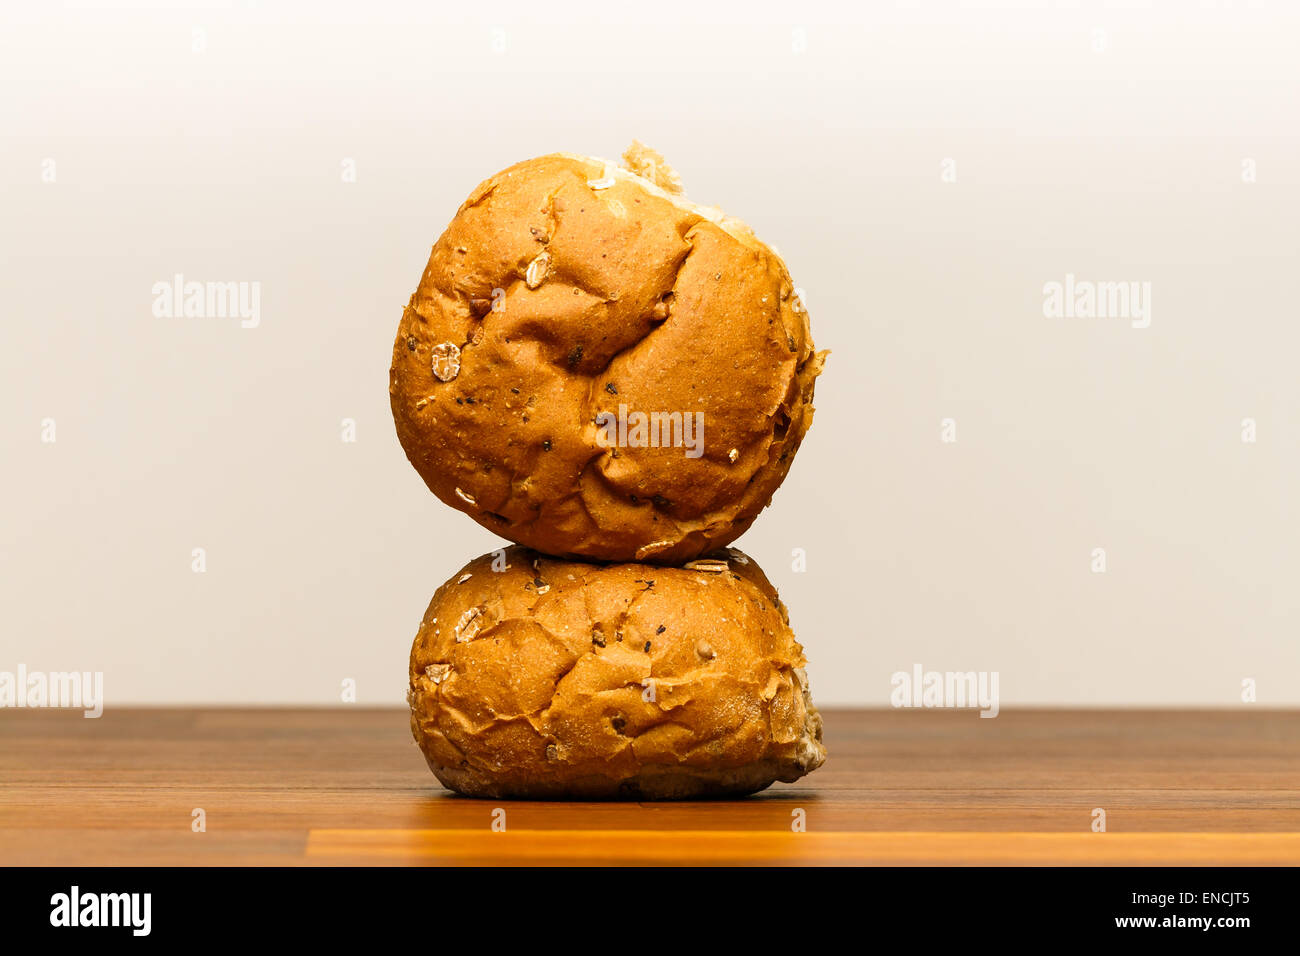 Two spelt buns on wooden surface. One is on its side on top of the other. Spelt is also known as dinkel or hulled wheat. Spelt i Stock Photo